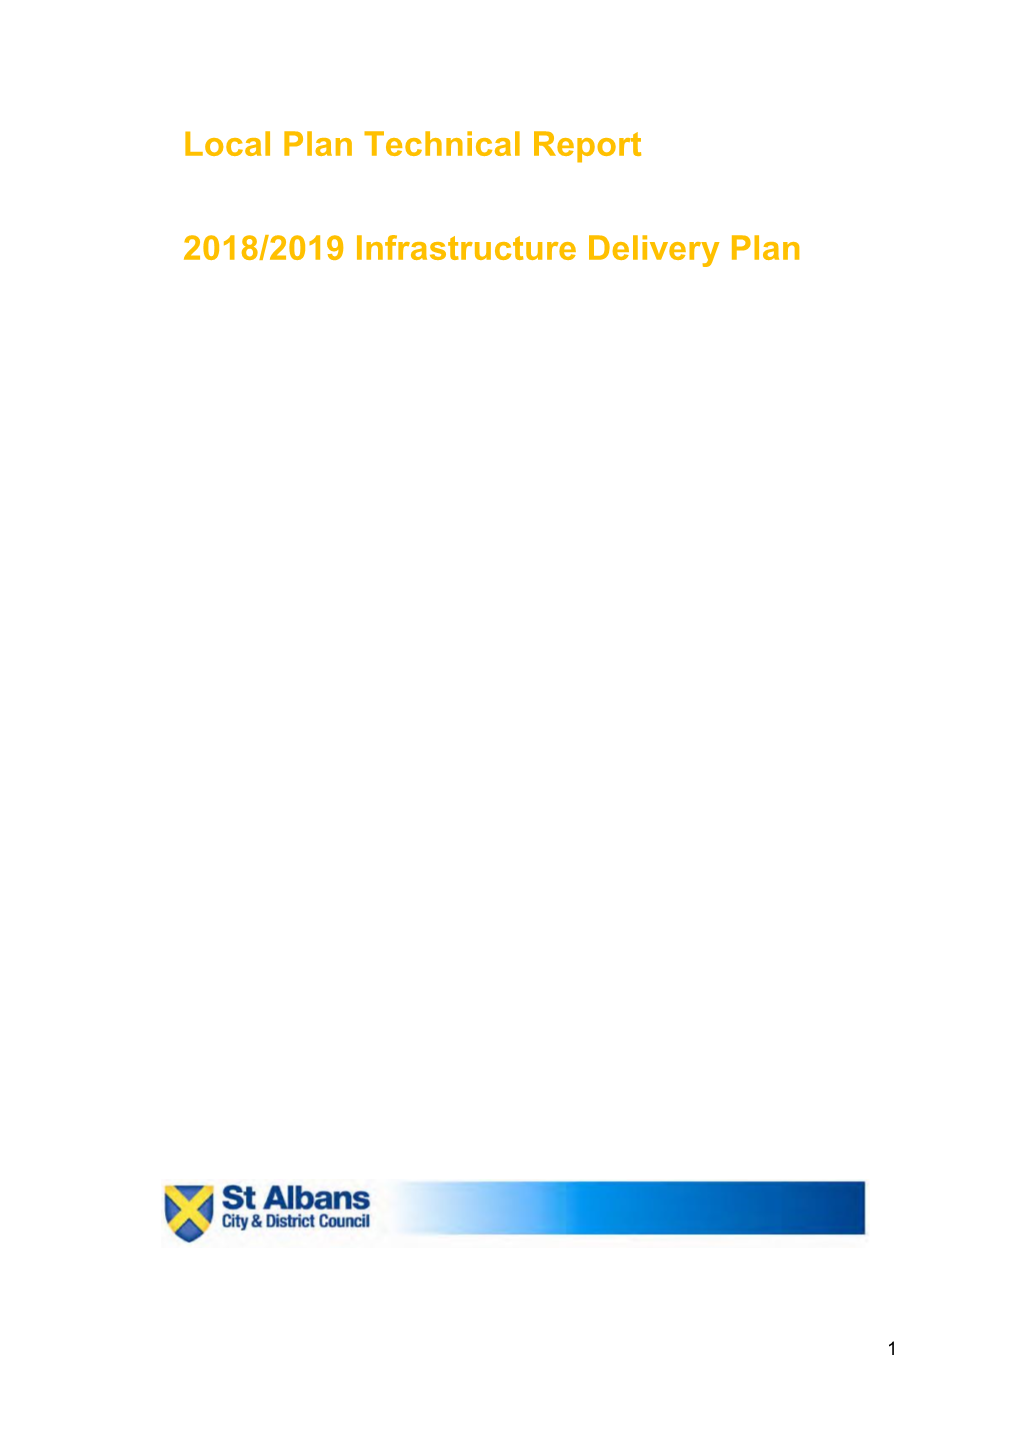 INFR 001 2018-2019 Infrastructure Delivery Plan